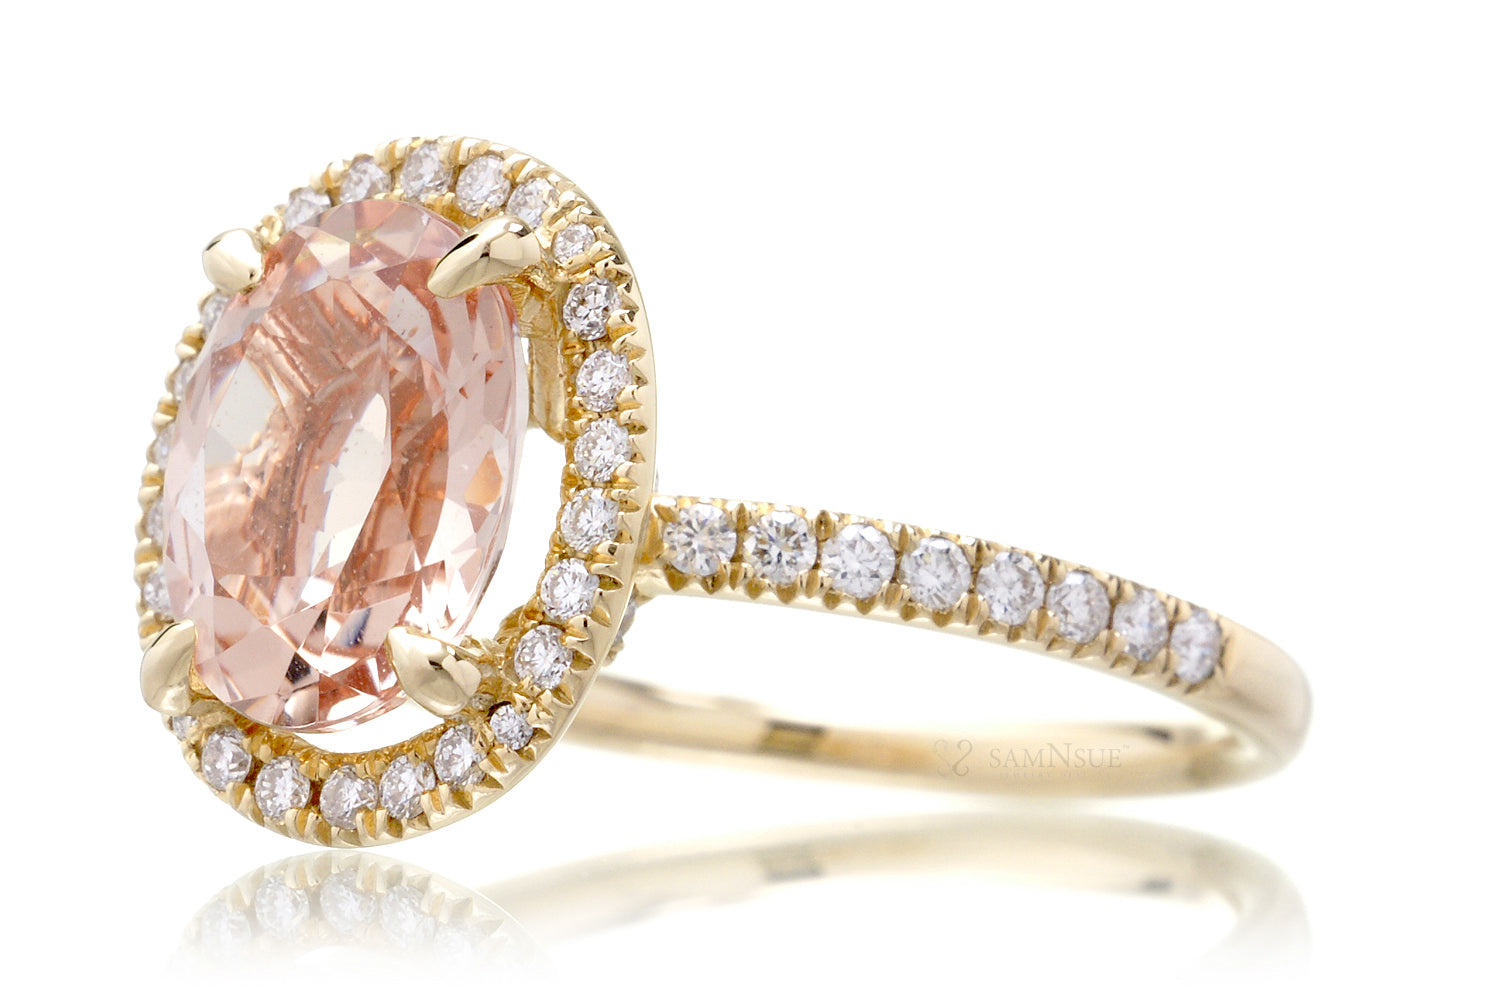 The Drenched Oval Morganite